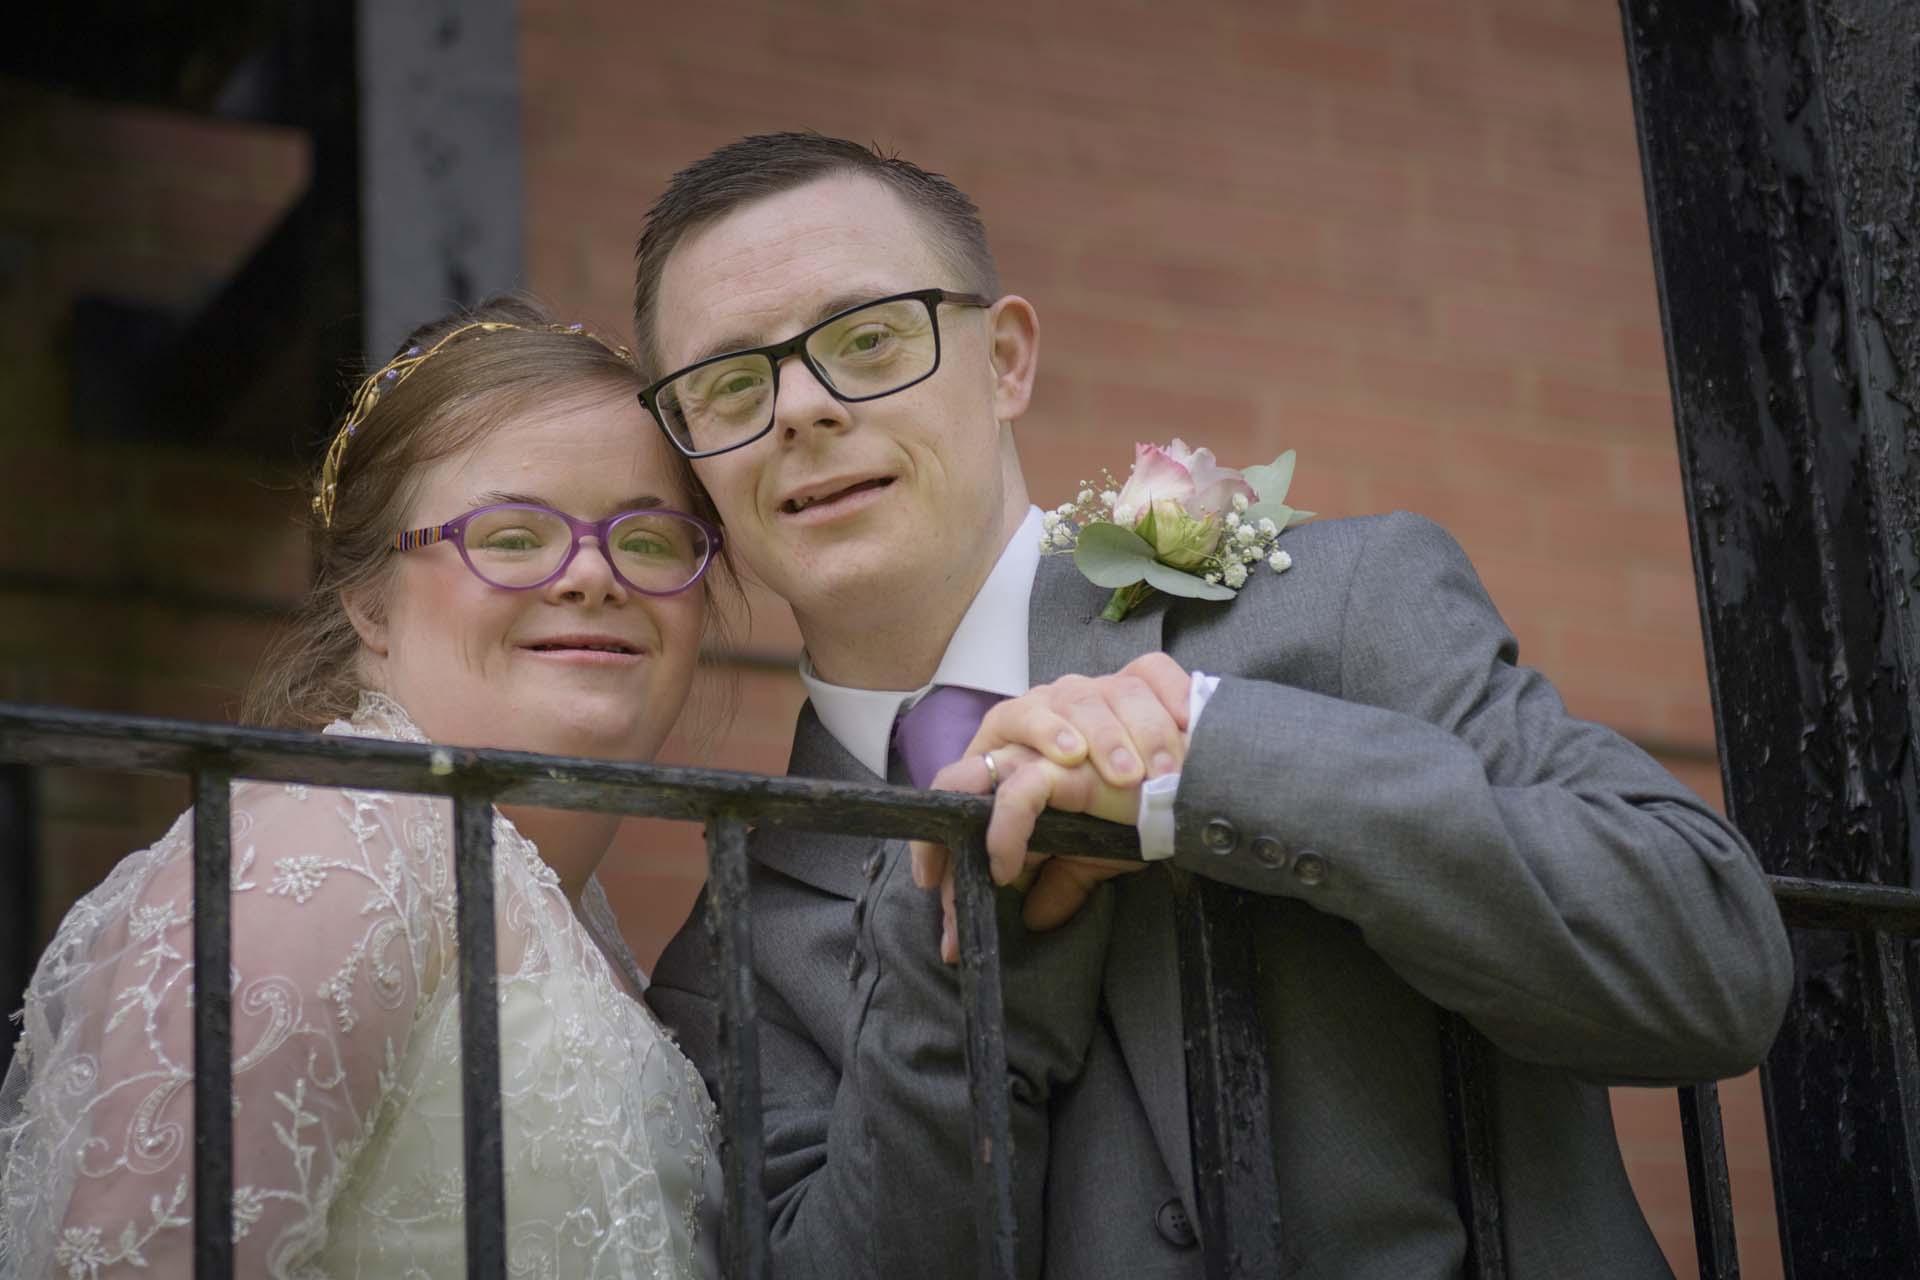 James Heidi wedding Coventry Down's syndrome camberwell